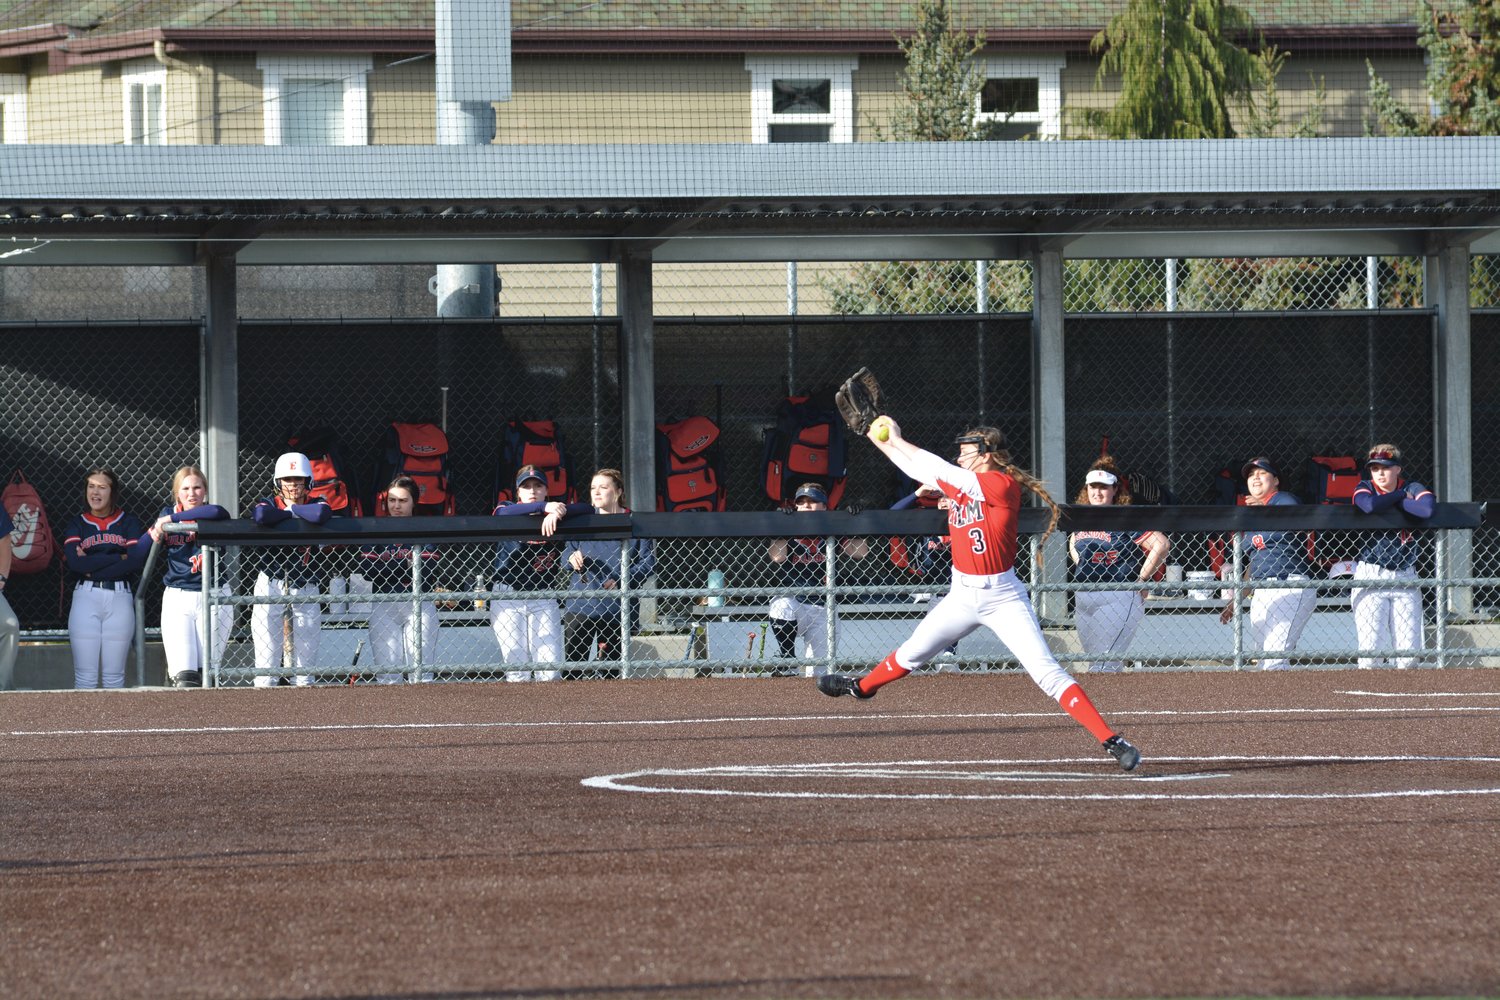 Pitcher Madisyn Erickson delivers a pitch against Ellensburg on Friday, March 25 at Bellevue College.